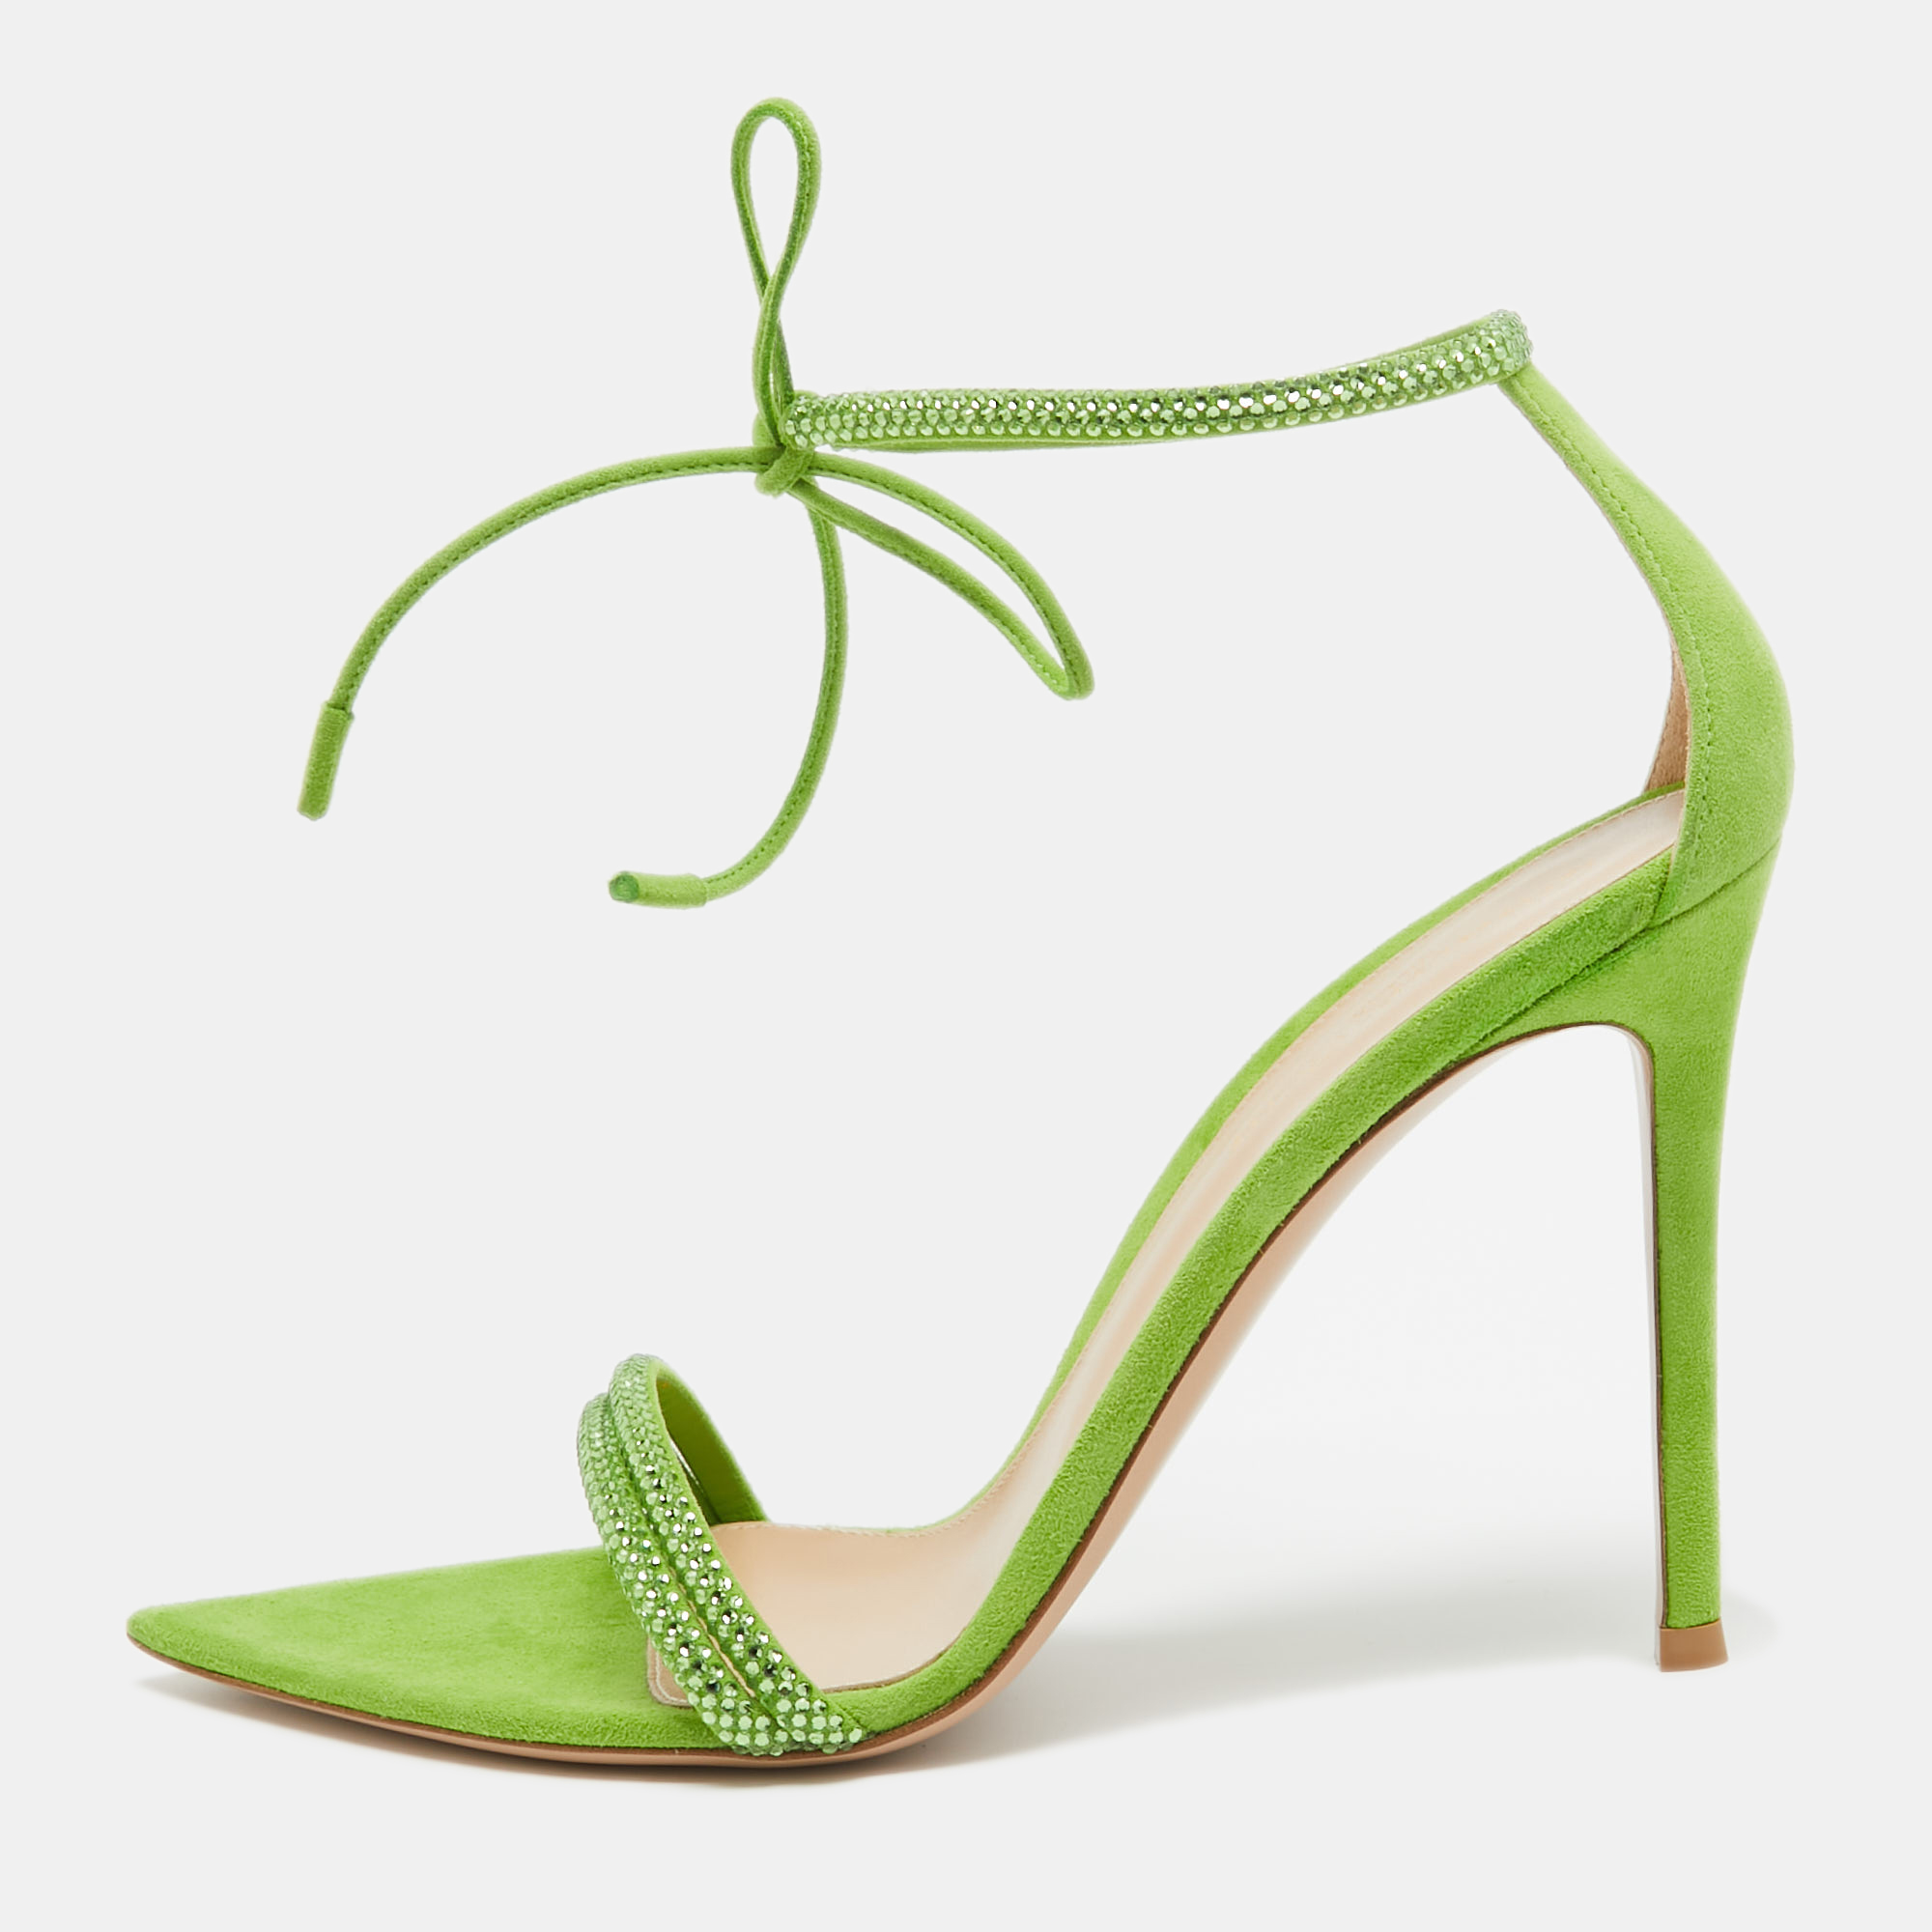 Gianvito rossi green suede crystal embellished montecarlo sandals size 39